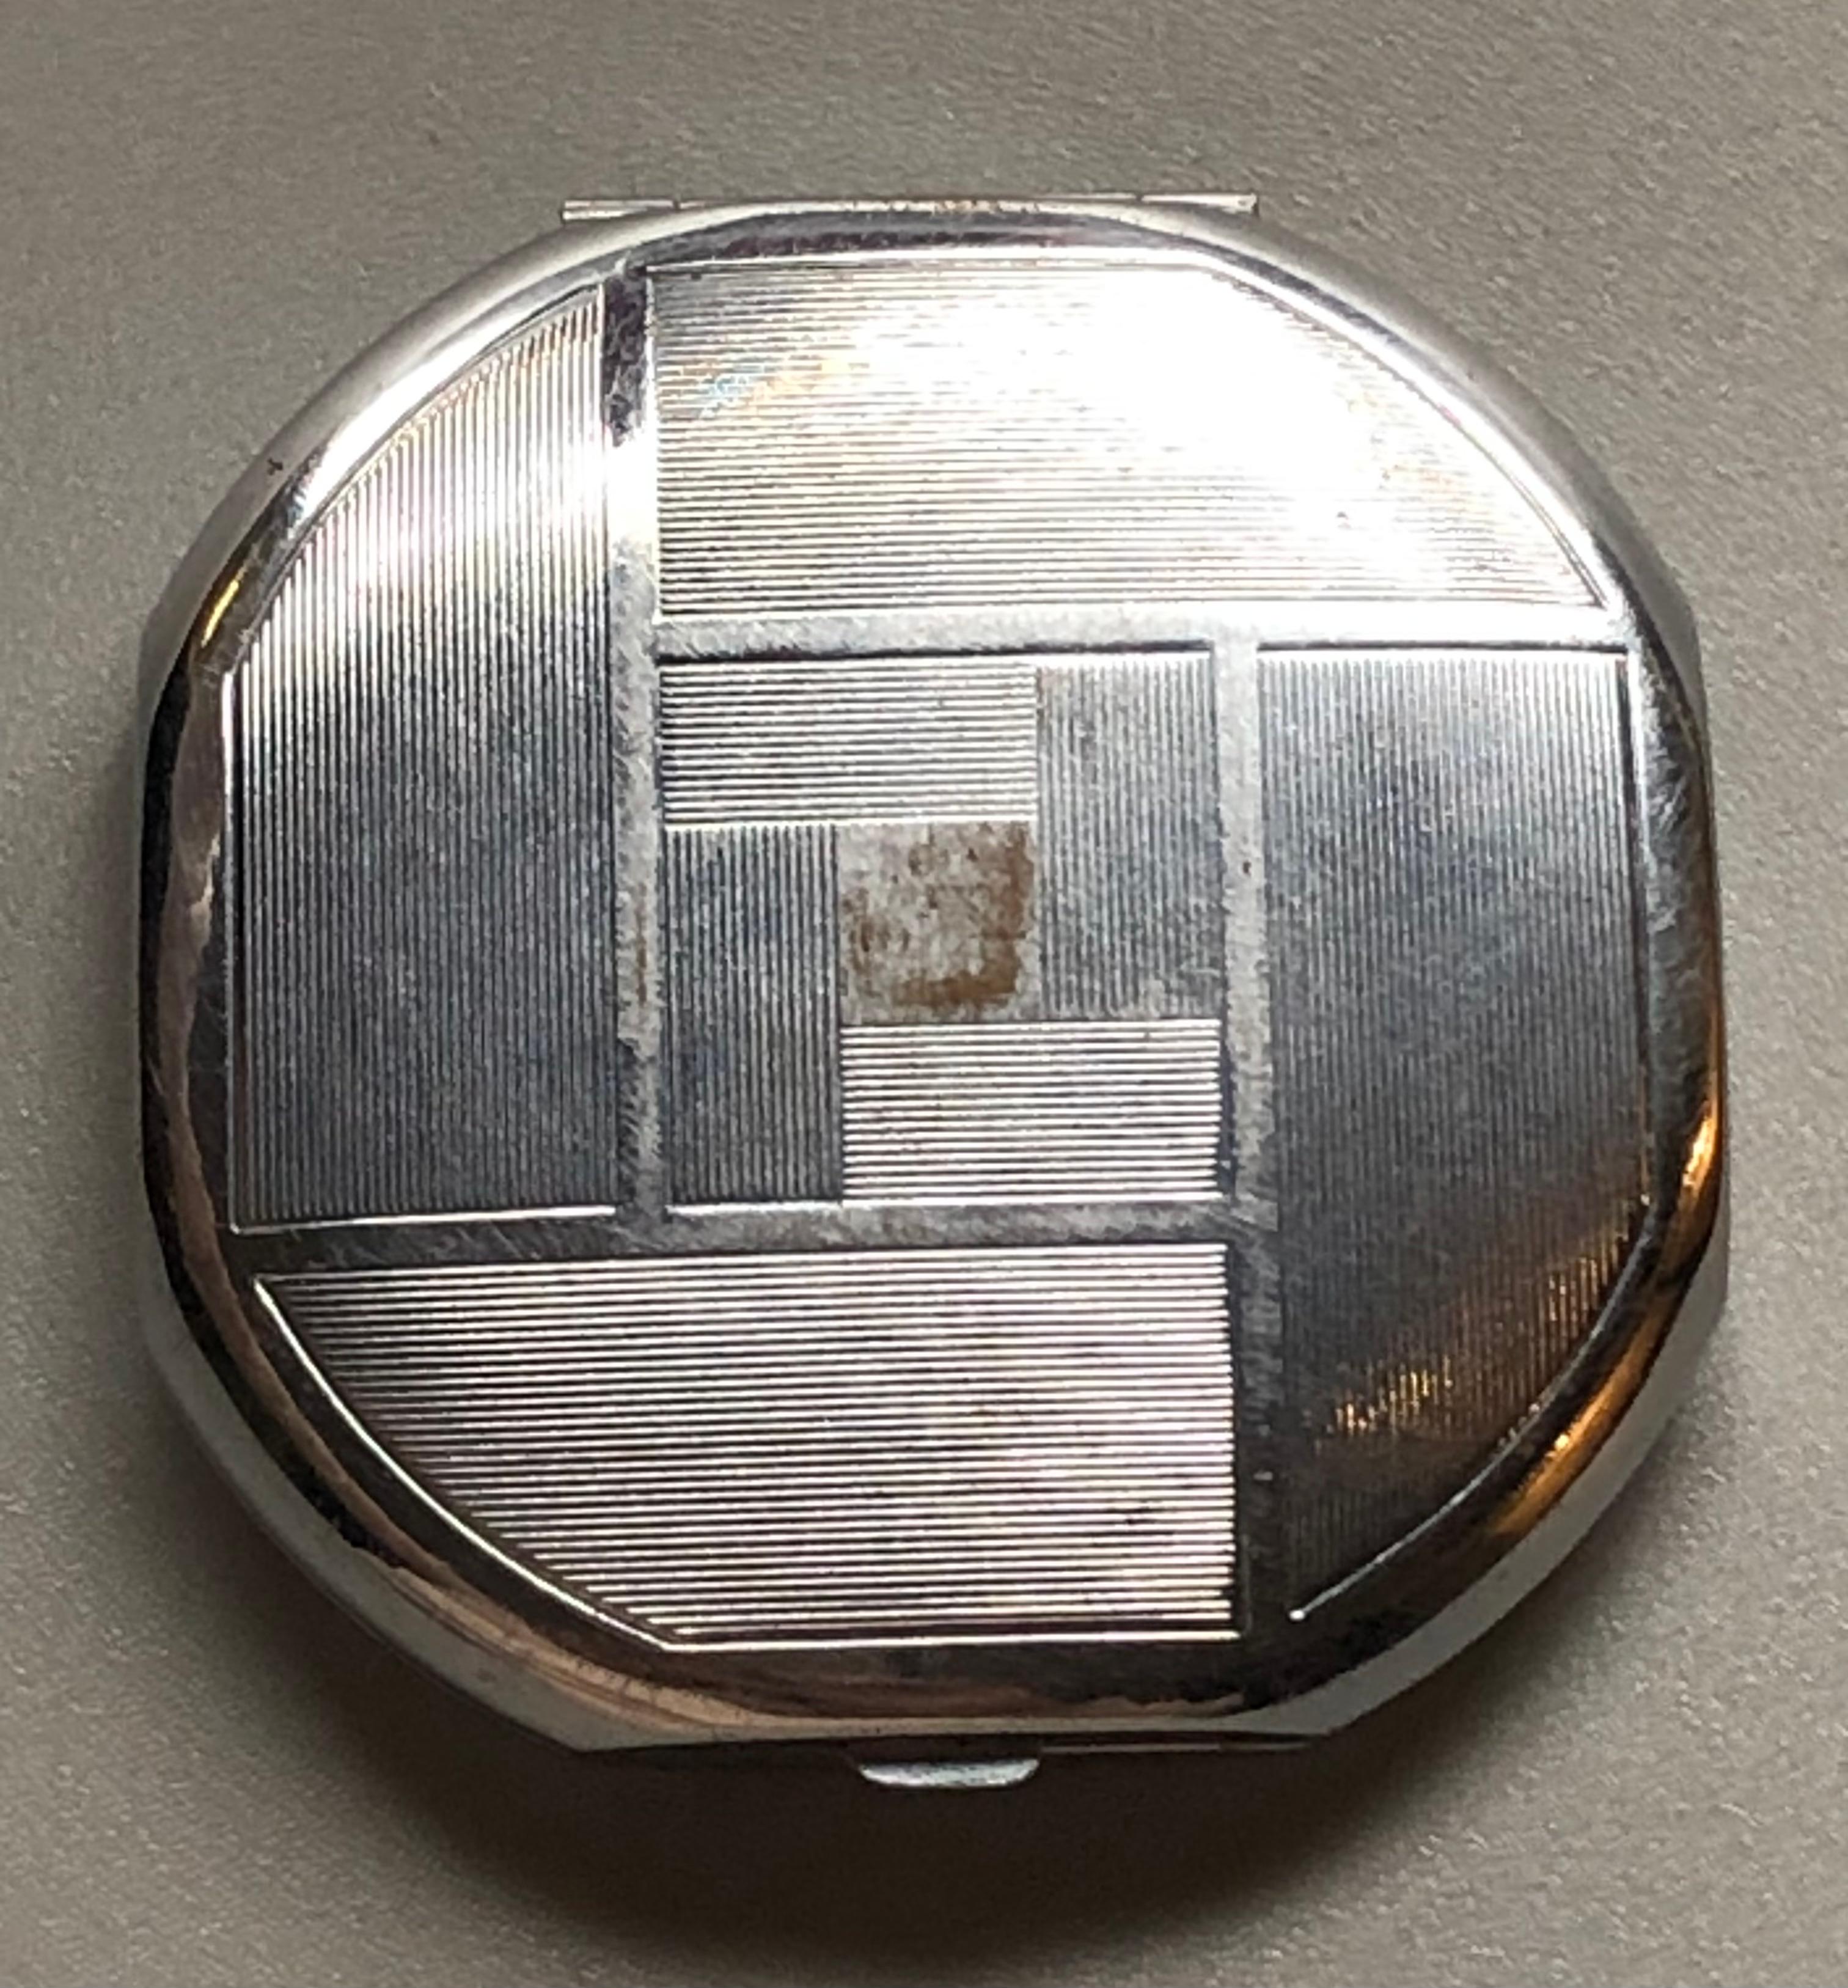 This beautiful round compact has squared off edges, the enamel is in an unusual duck egg blue and a contrasting deeper blue on the front, being completed by a silver square swirl pattern in the centre. The base has a mirrored image of the front in a